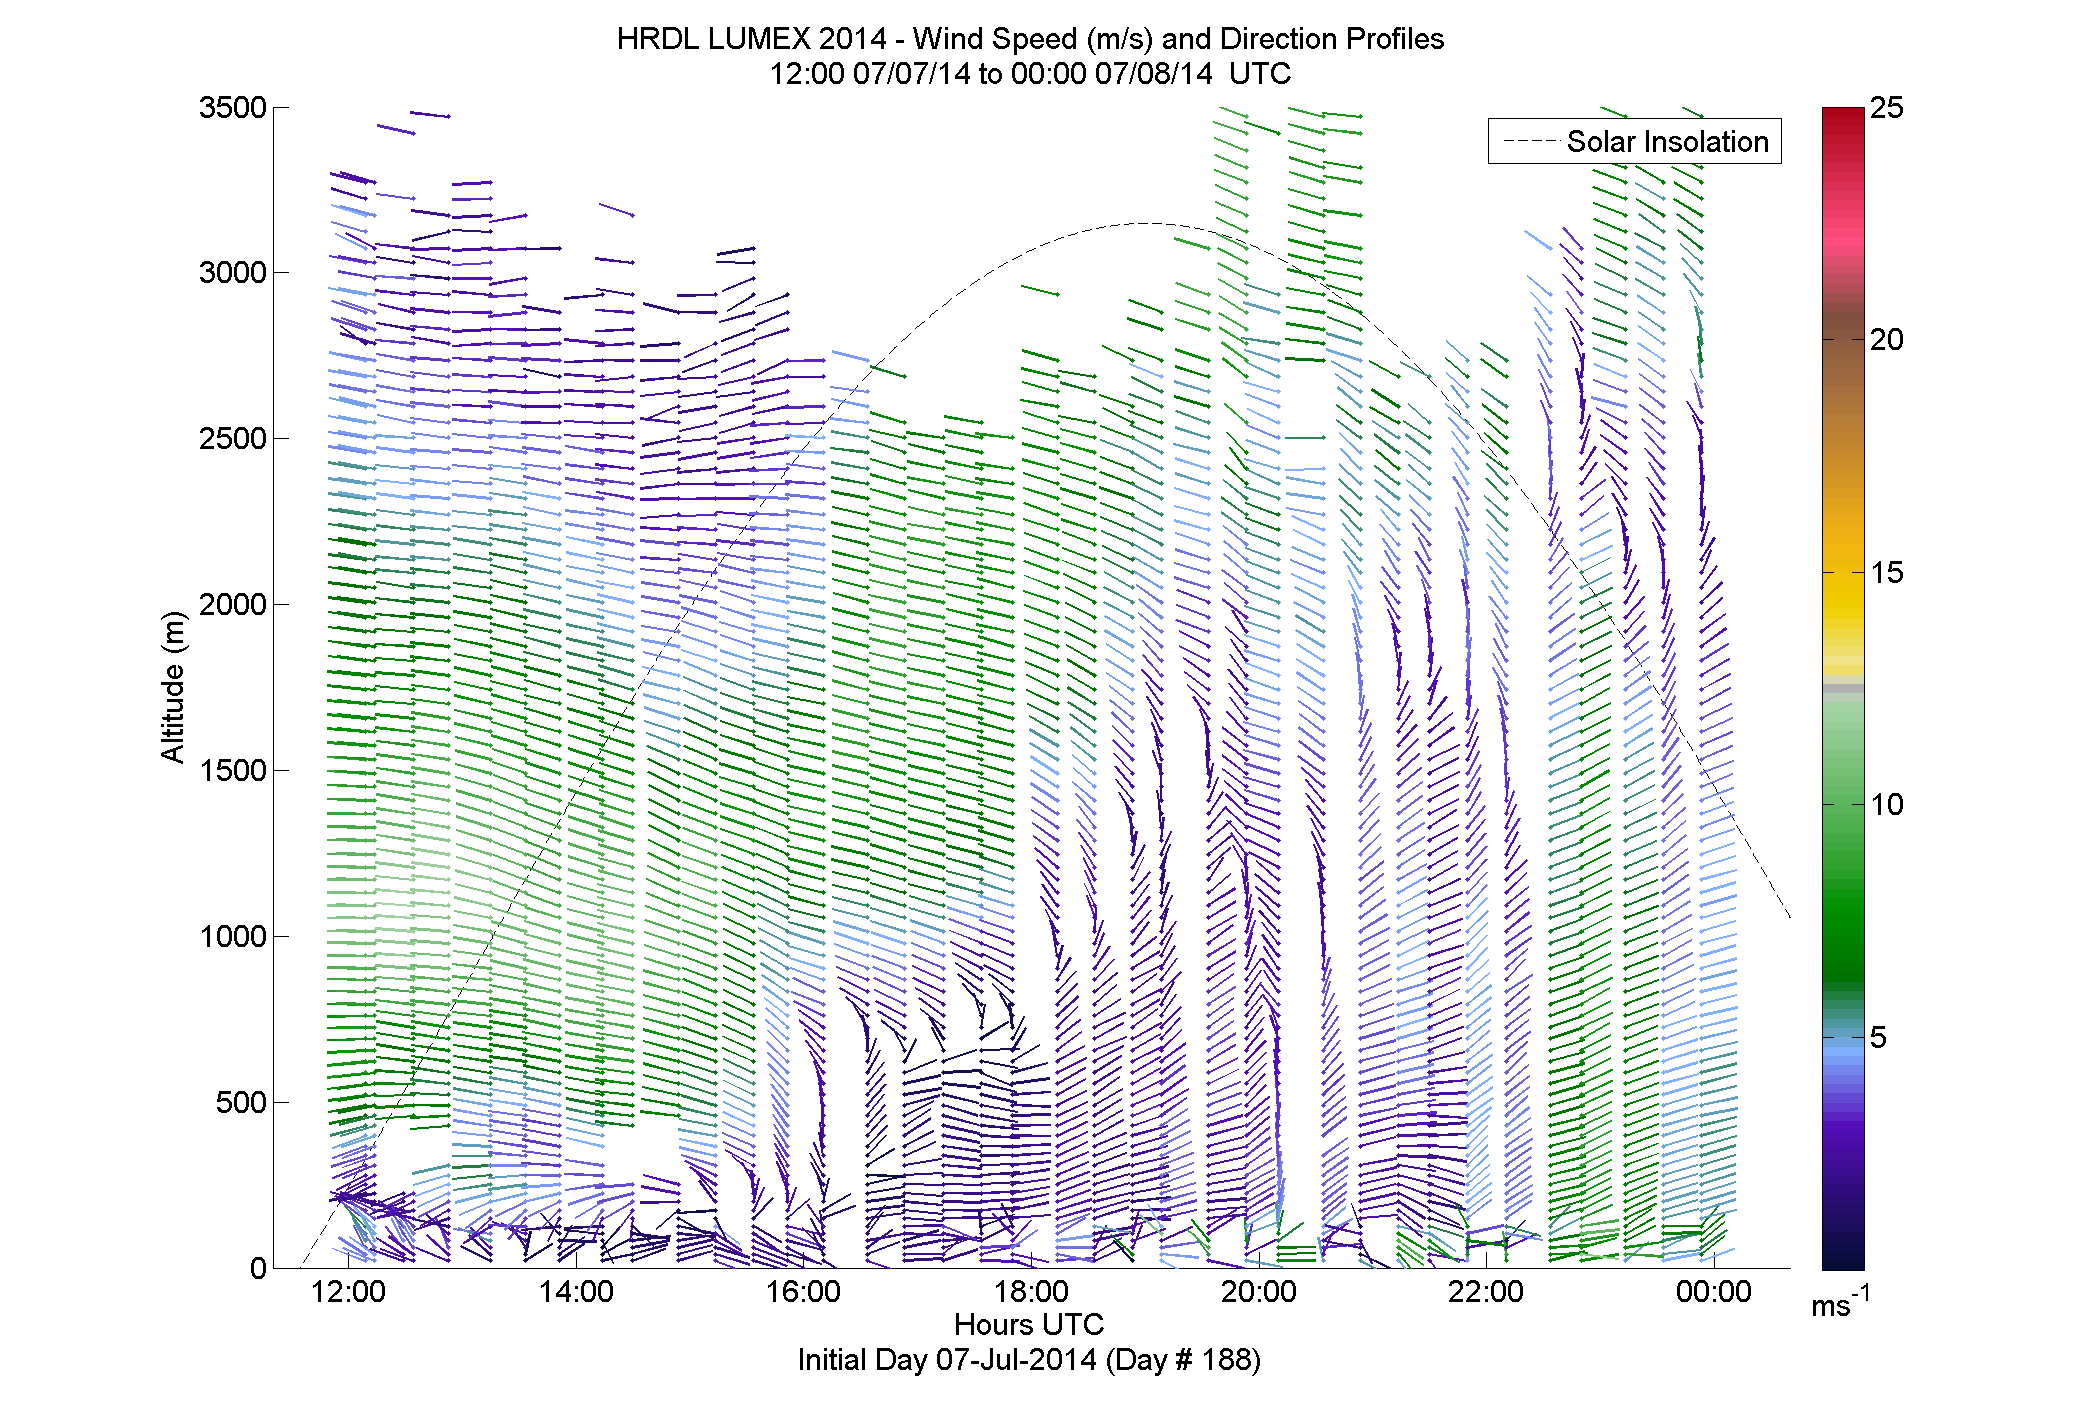 HRDL speed and direction profile - July 7 pm